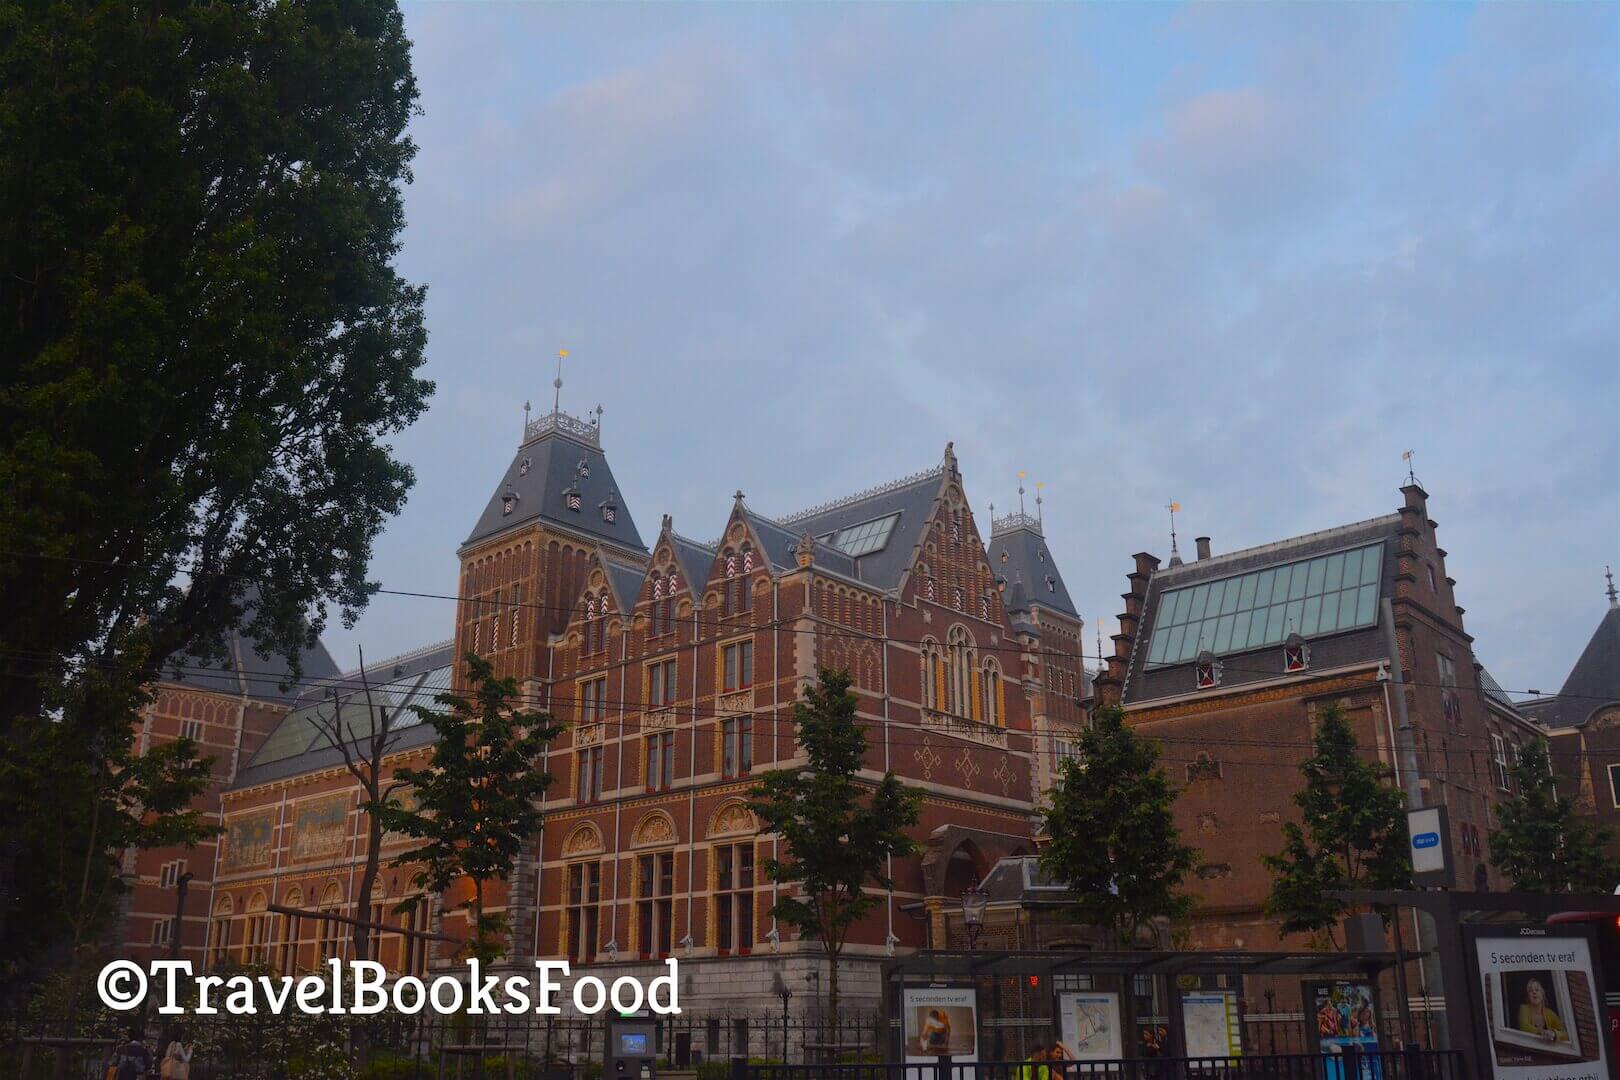 This is a photo of Rijksmuseum in Amsterdam. This is a big looking orangish brown building